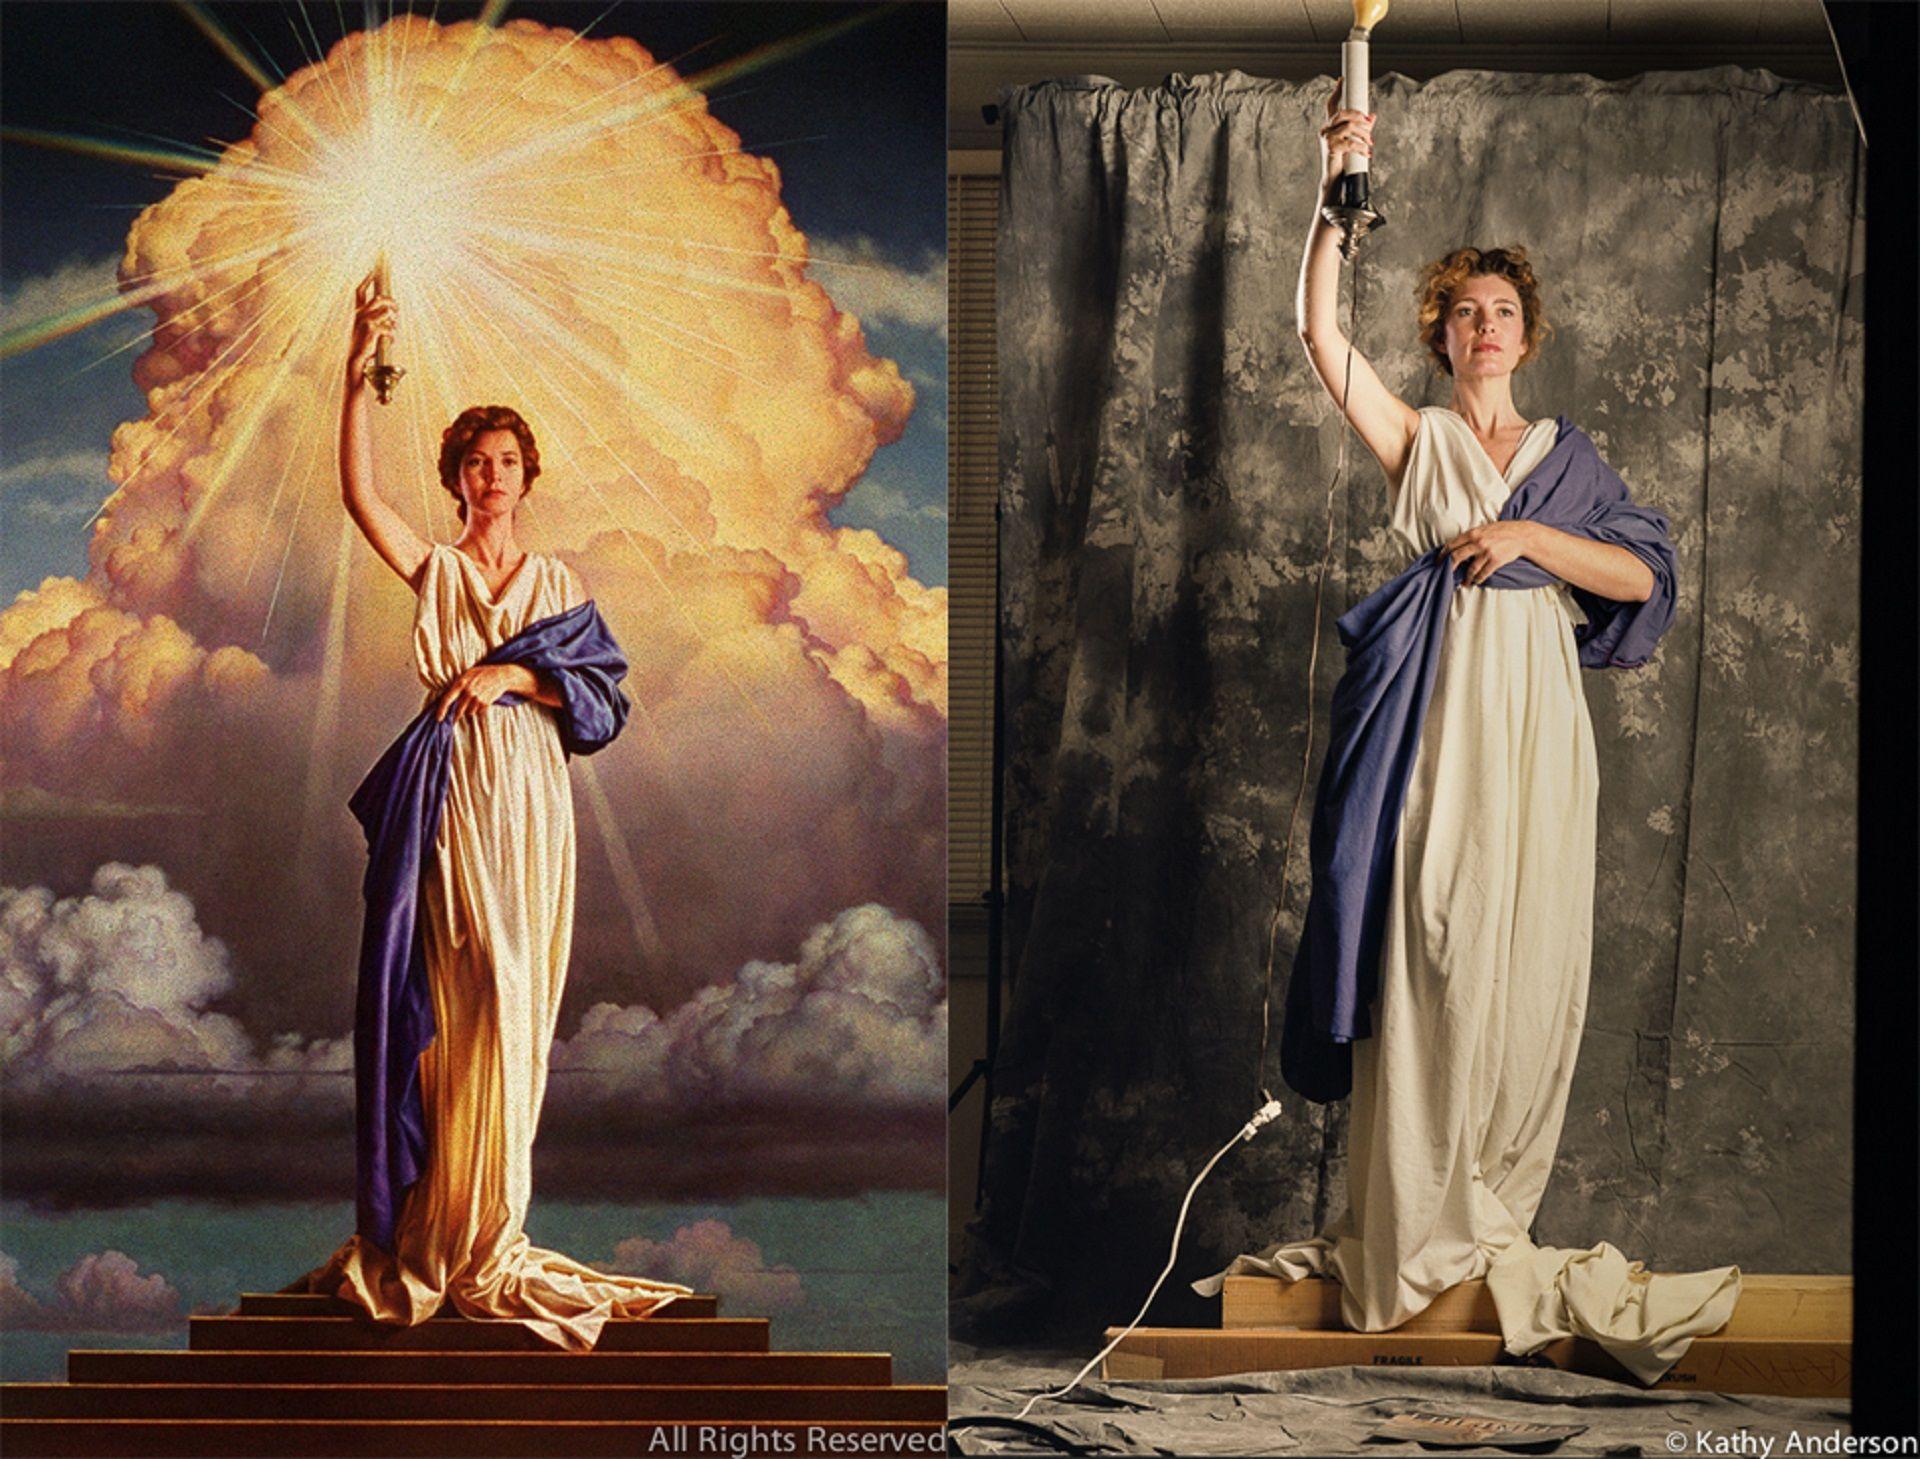 Columbia Torch Lady Logo - The Story Behind the Iconic Columbia Pictures Photoshoot